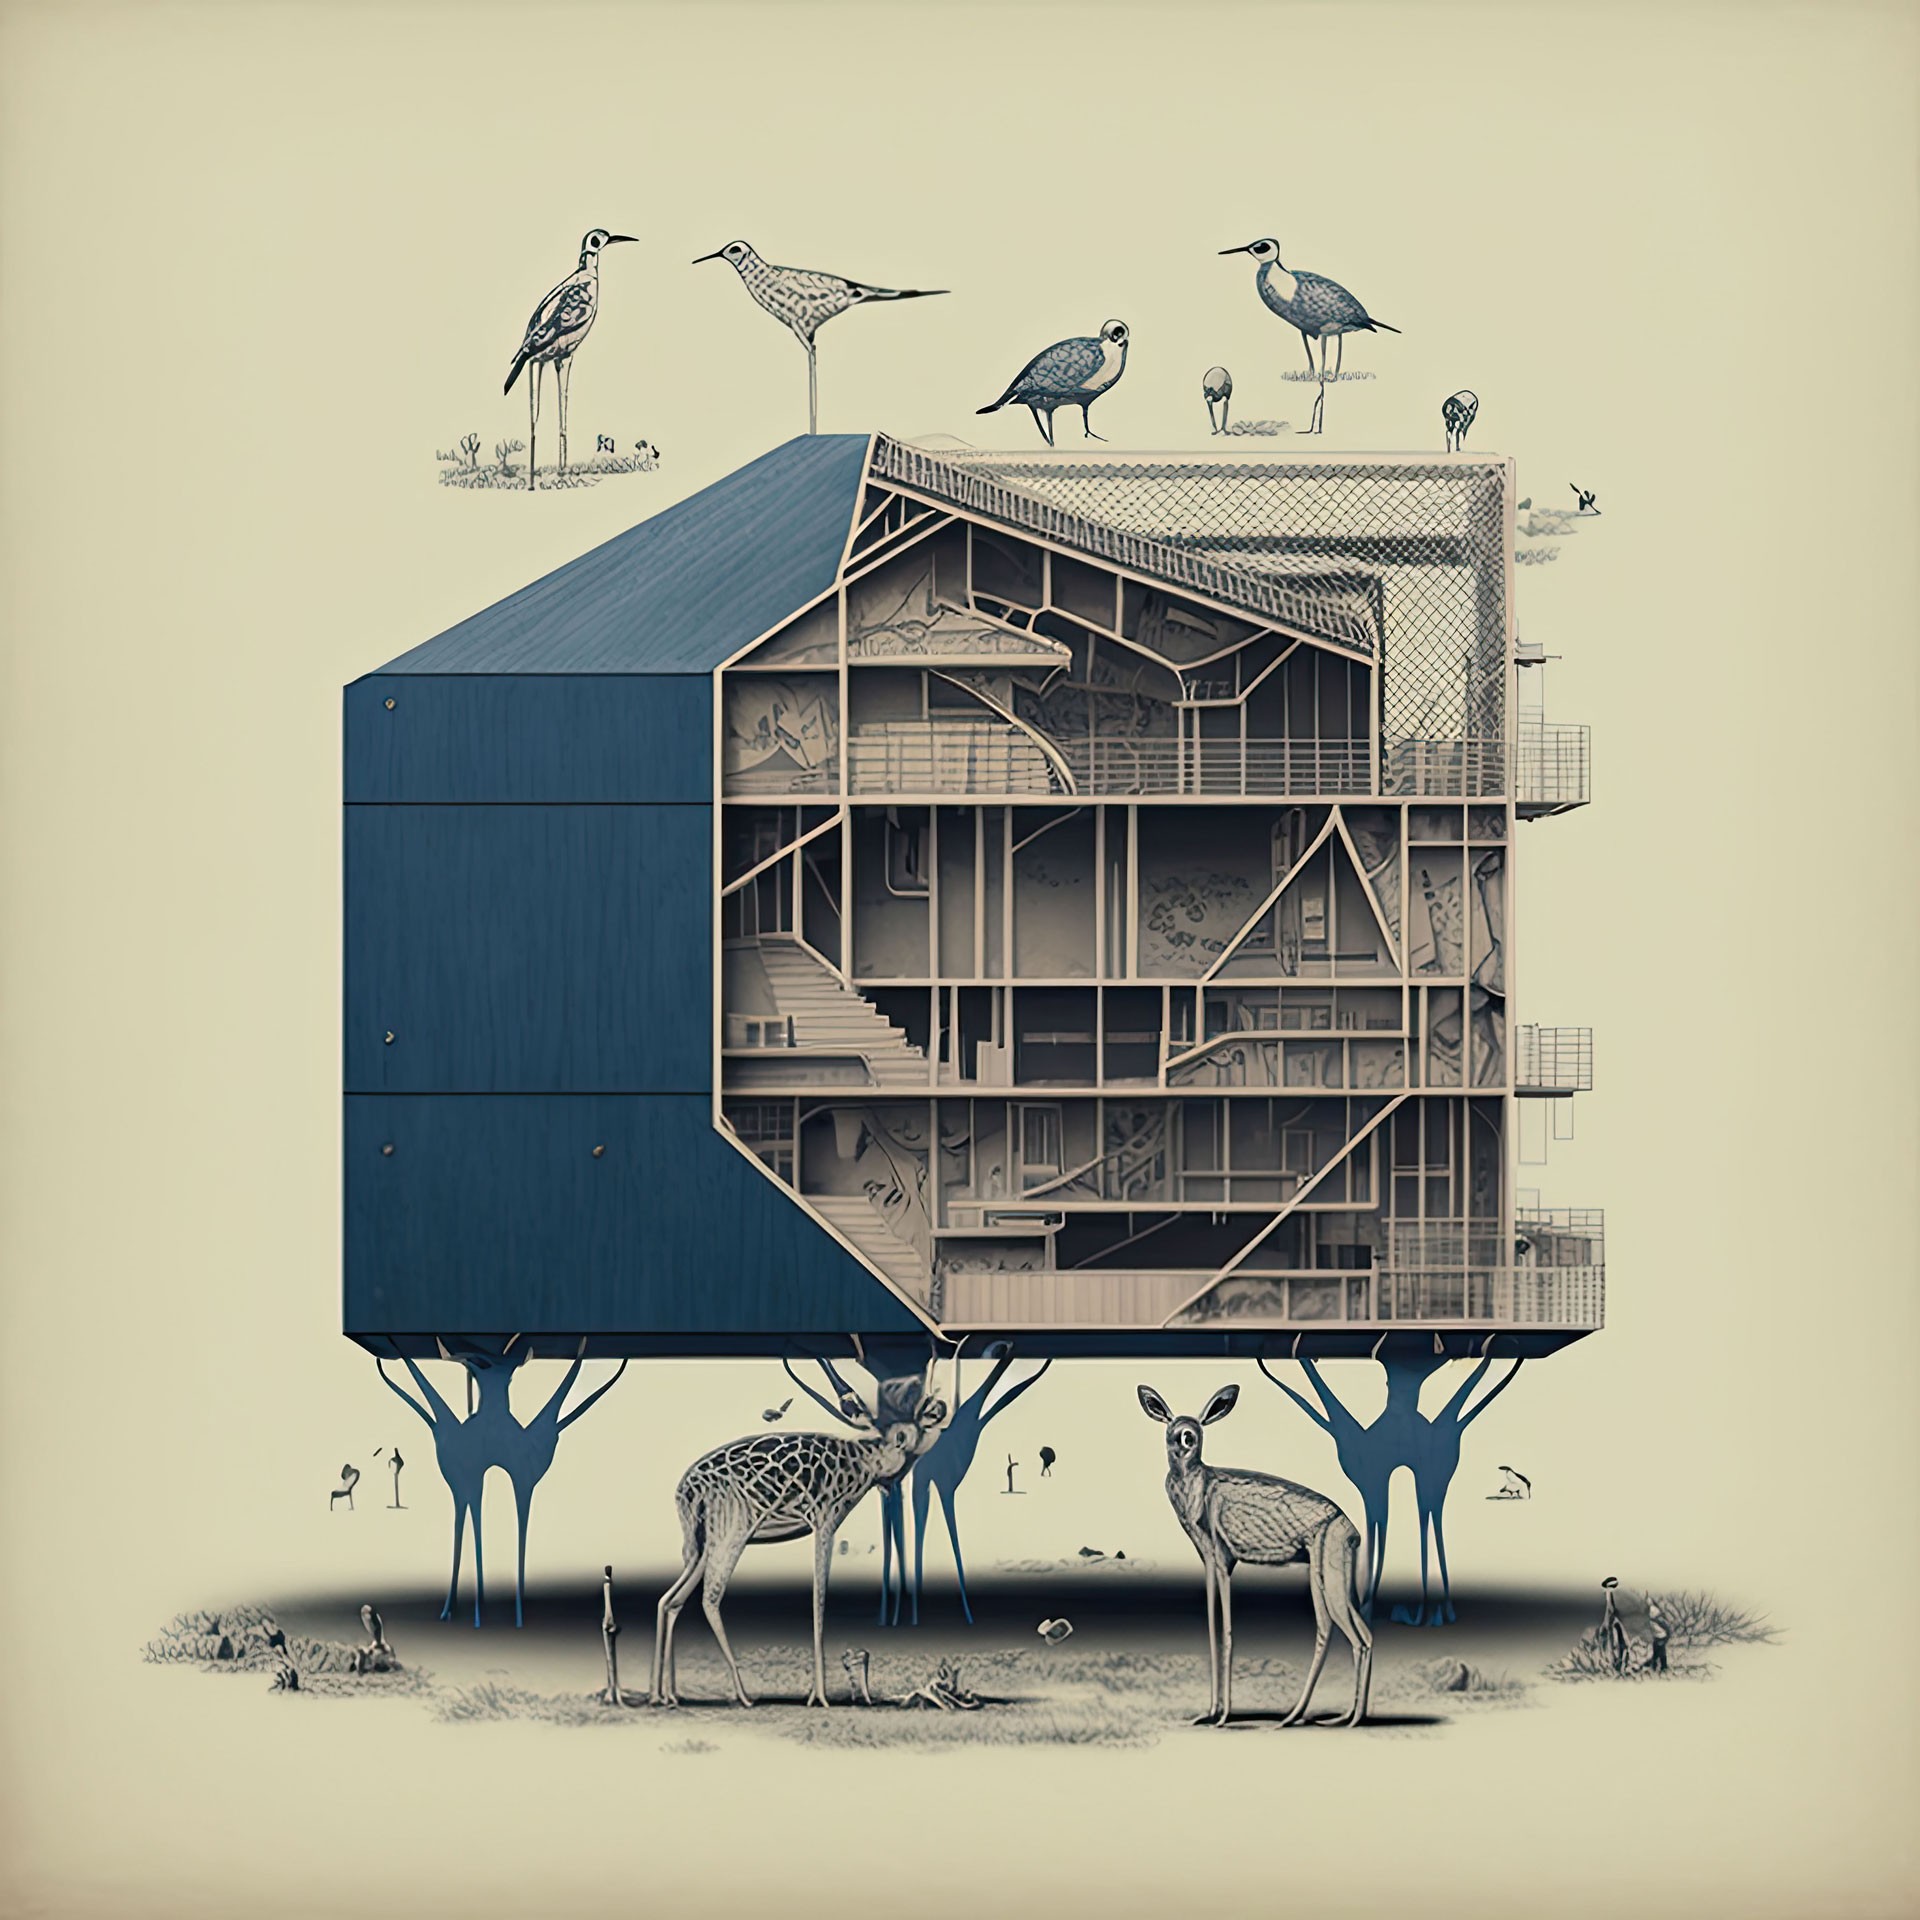 House in longitudinal section, carried by deer under the house, on the roof are birds